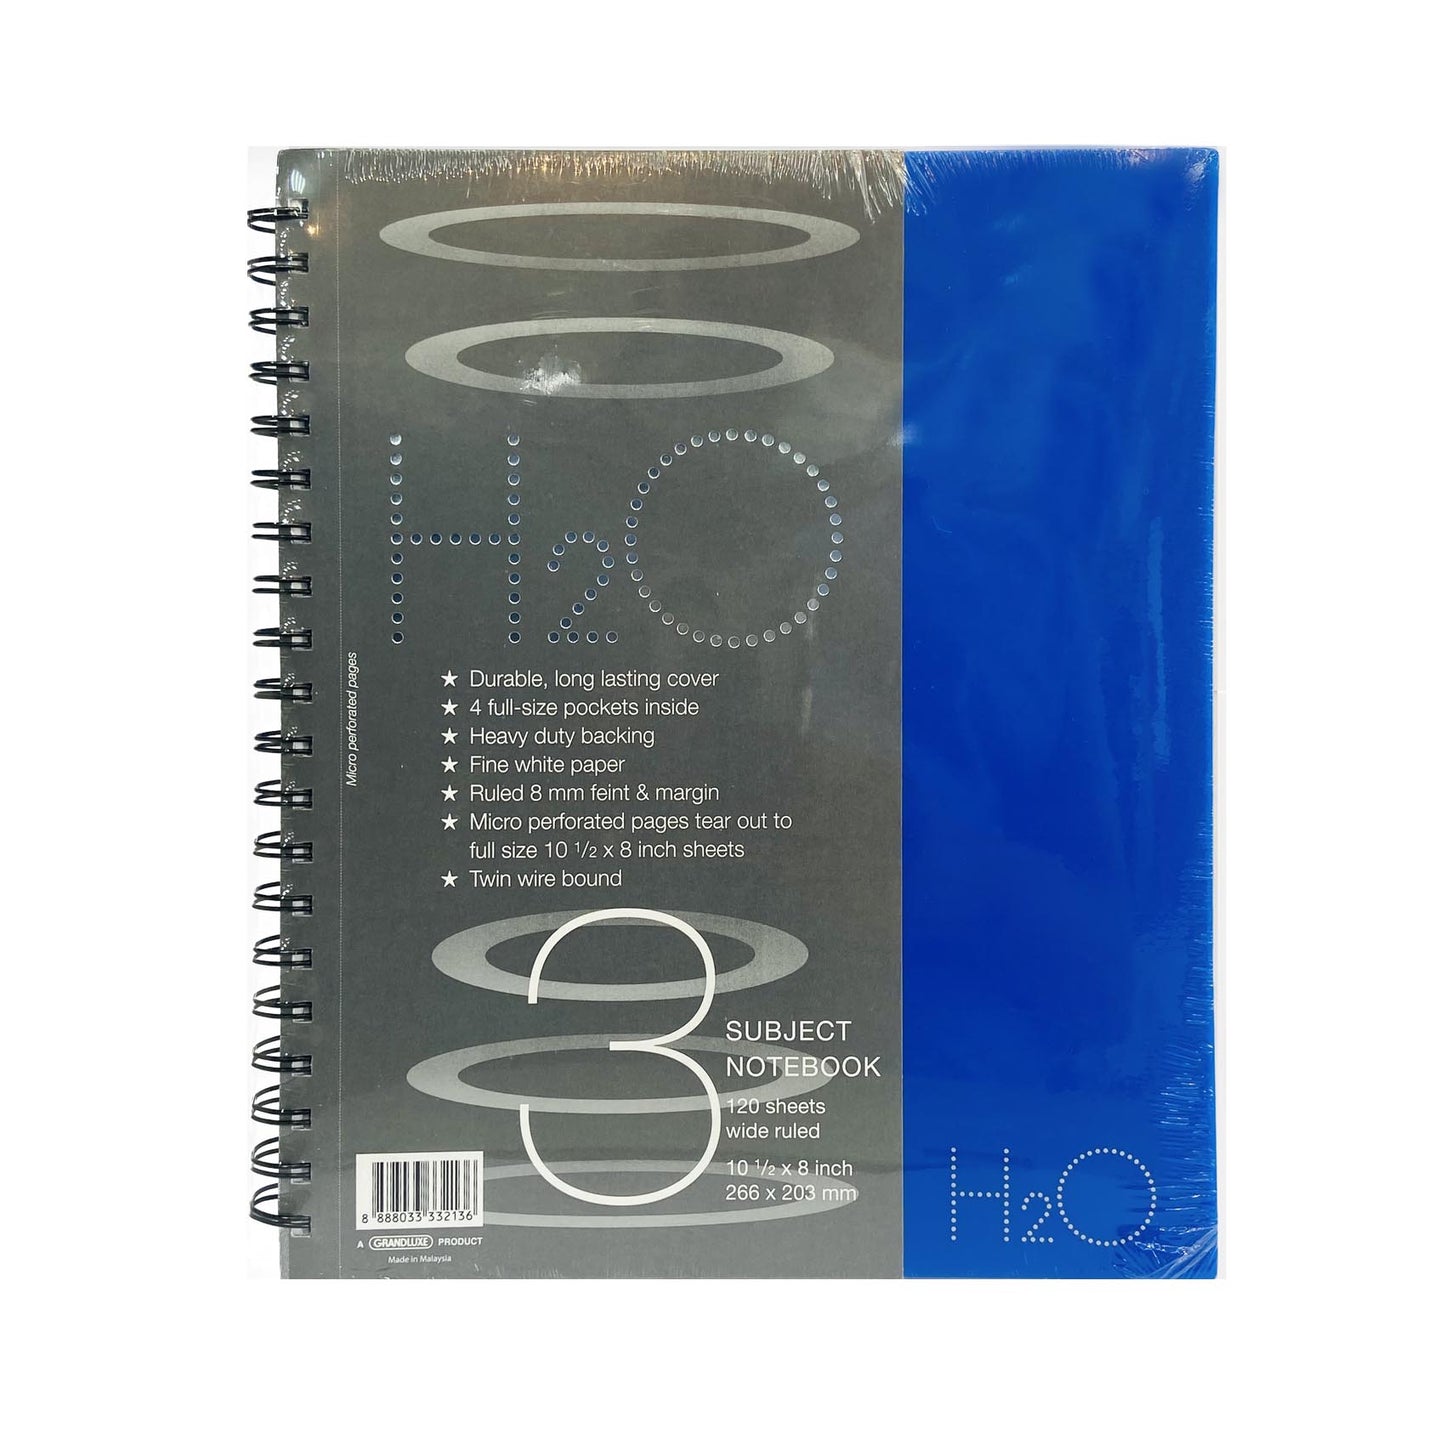 3 SUBJECT NOTE BOOK 120 sheets Ruled  Spiral note